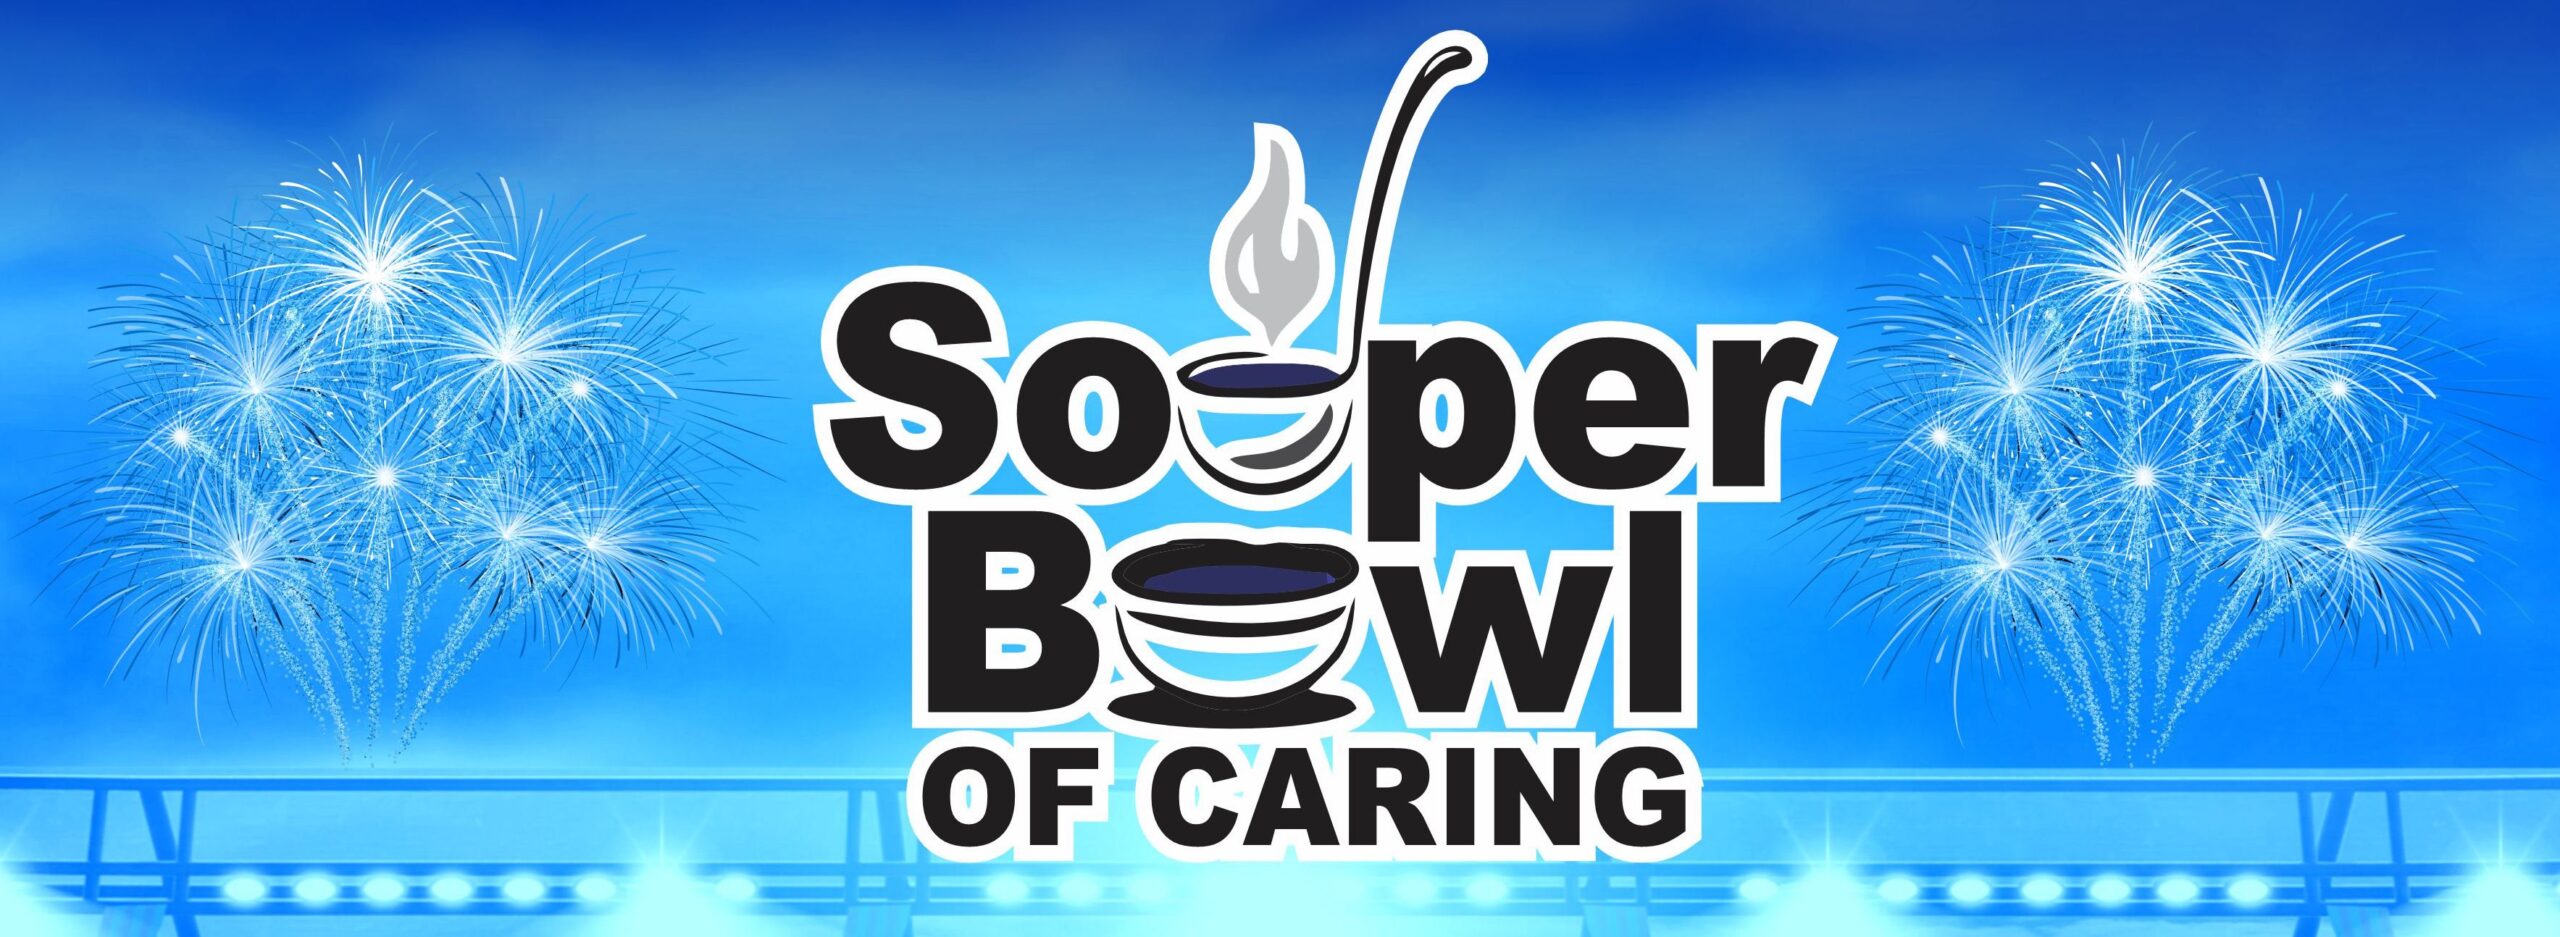 Join Frank and Bellavance for the SOUPer Bowl of Caring Events